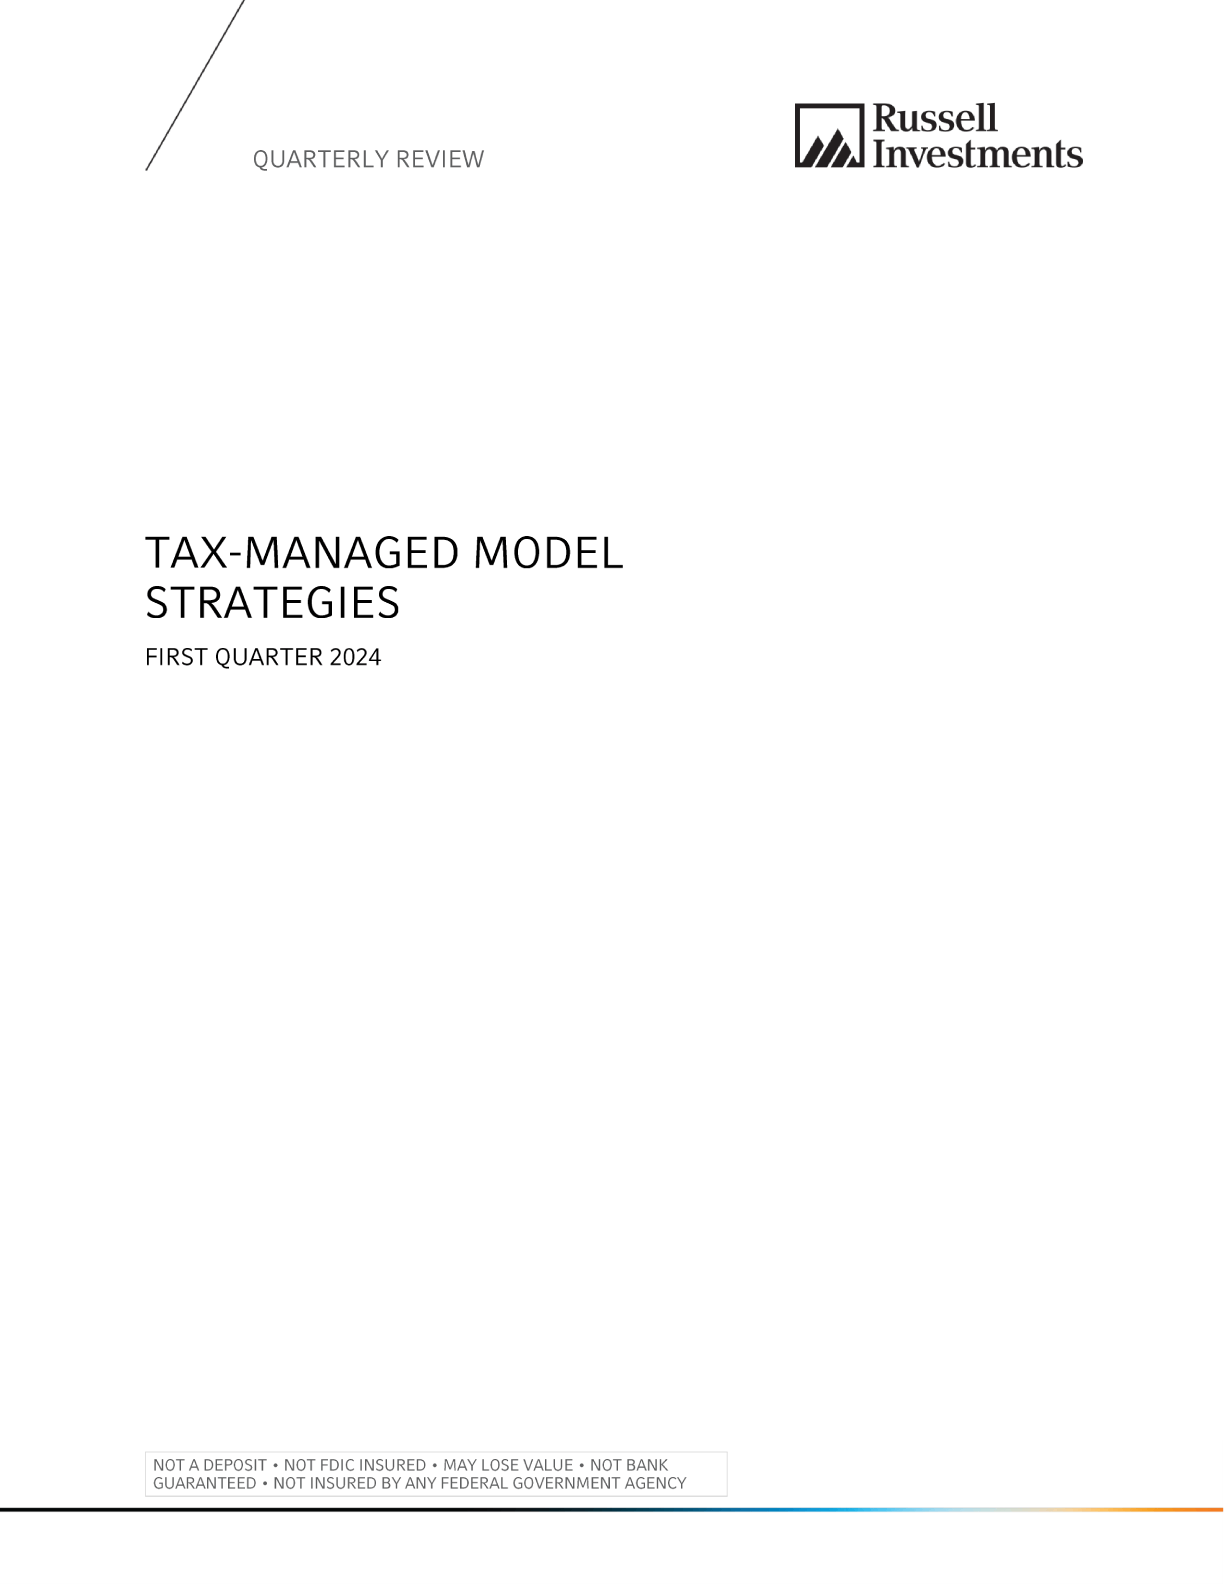 Tax-Managed Models Quarterly Review Thumbnail